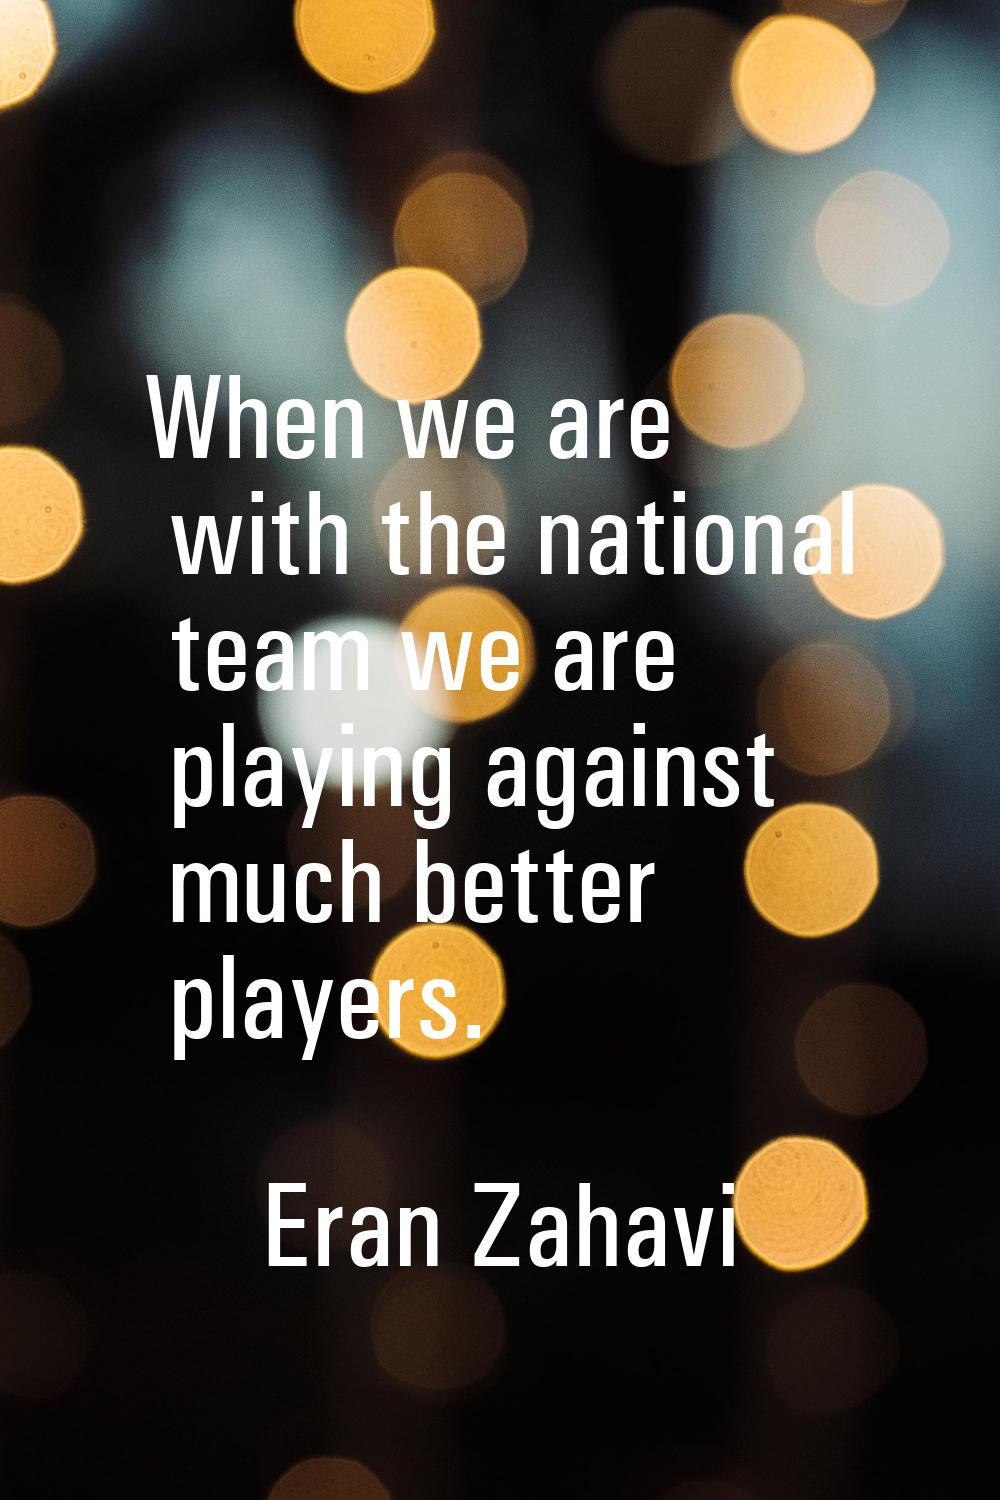 When we are with the national team we are playing against much better players.